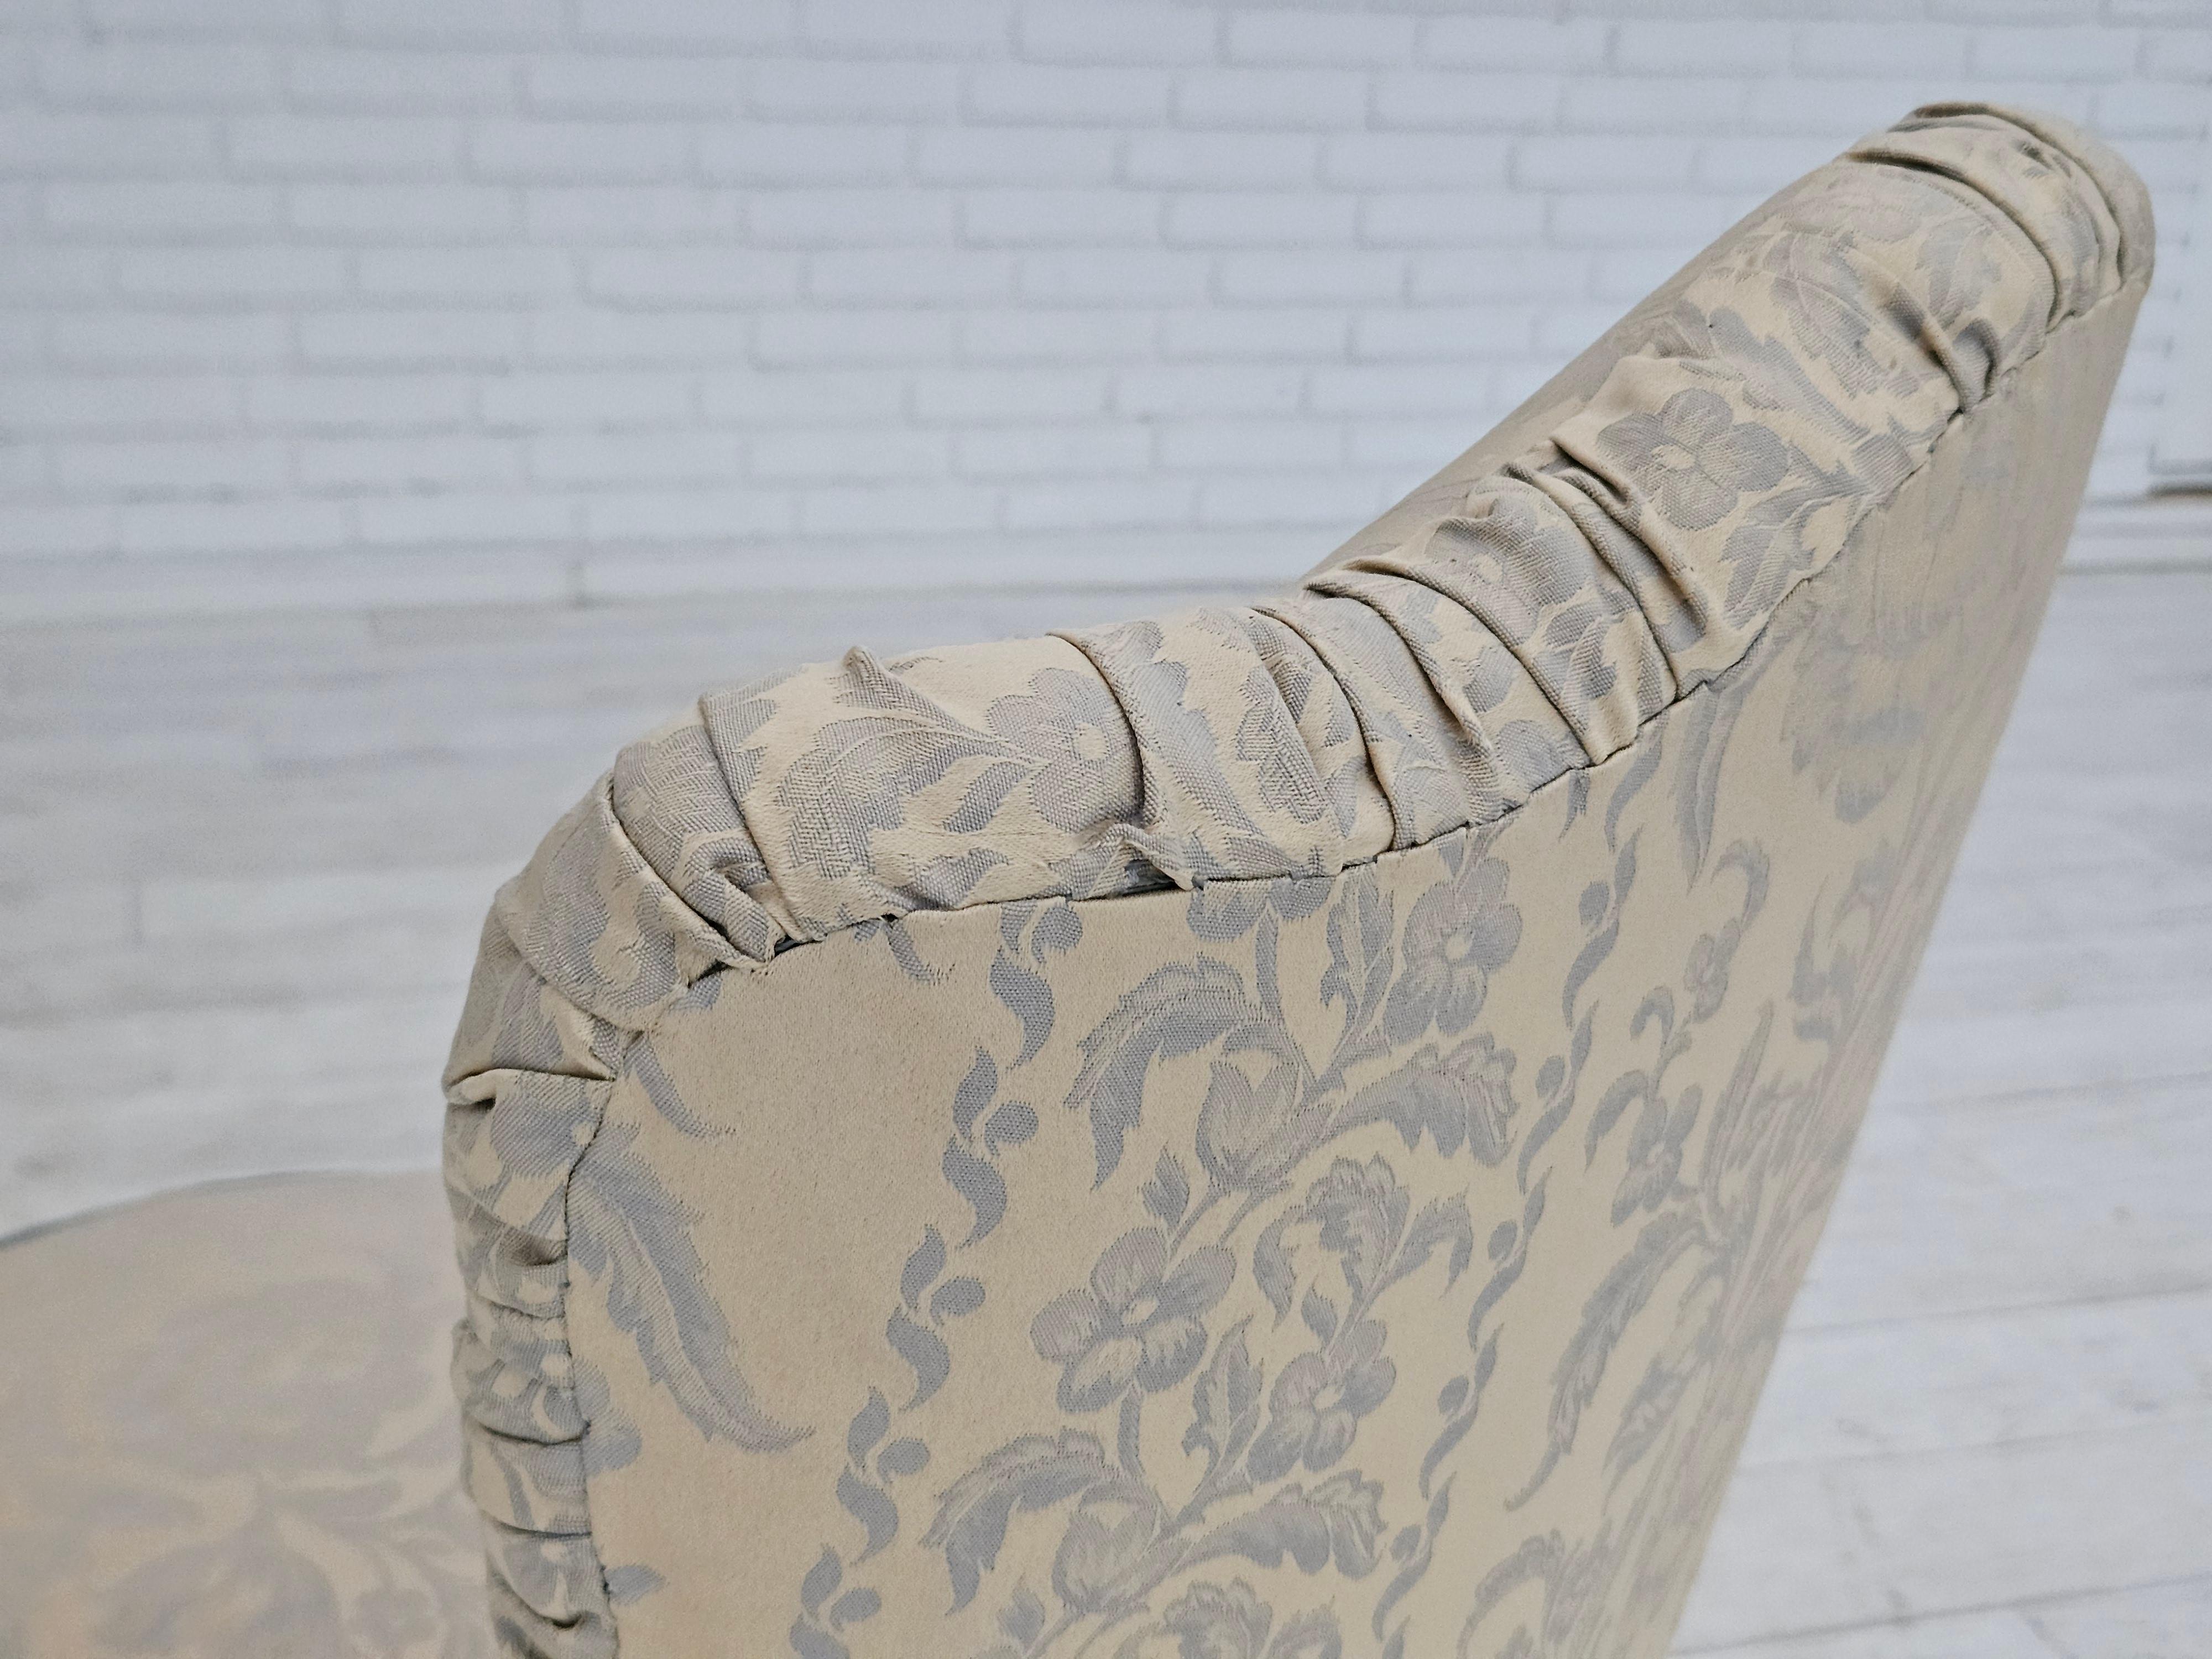 1950s, fauteuil Whiting, reupholstered, creamy/white floral fabric. en vente 5